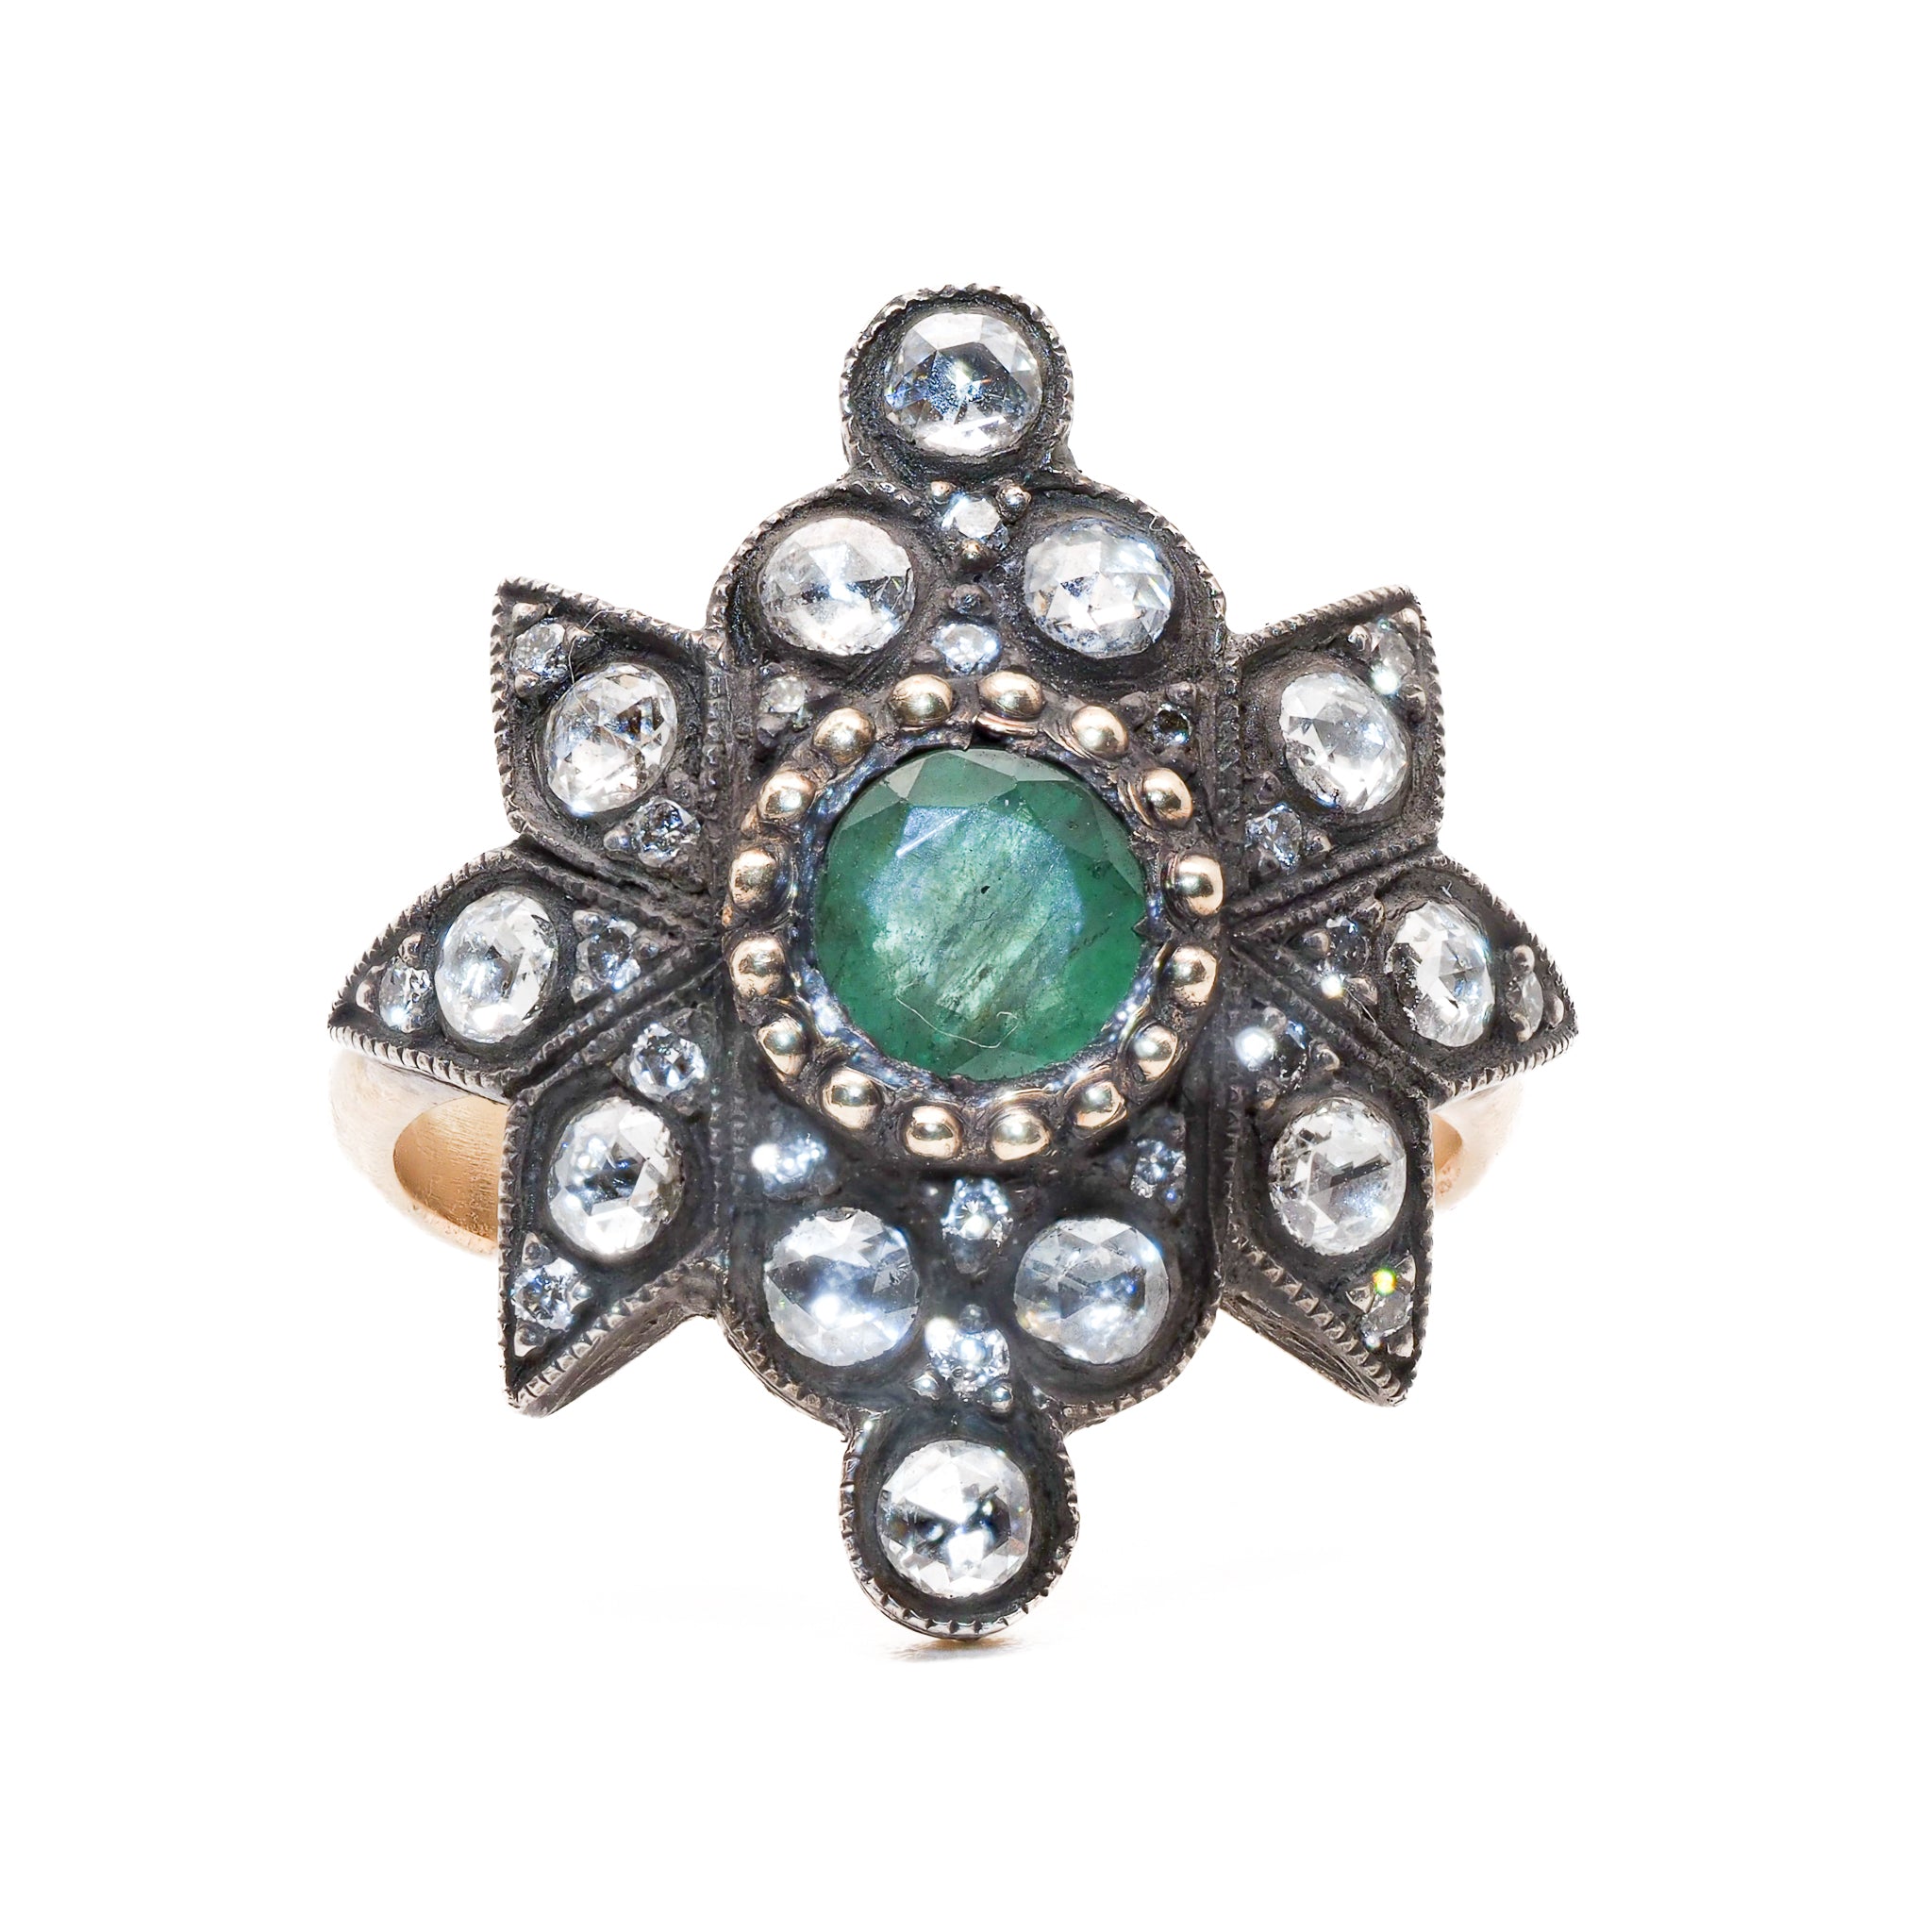 The Emerald Star Ring features a stunning 0.53ct natural emerald surrounded by 0.66ct diamonds, set in a luxurious combination of 14k yellow and silver gold.